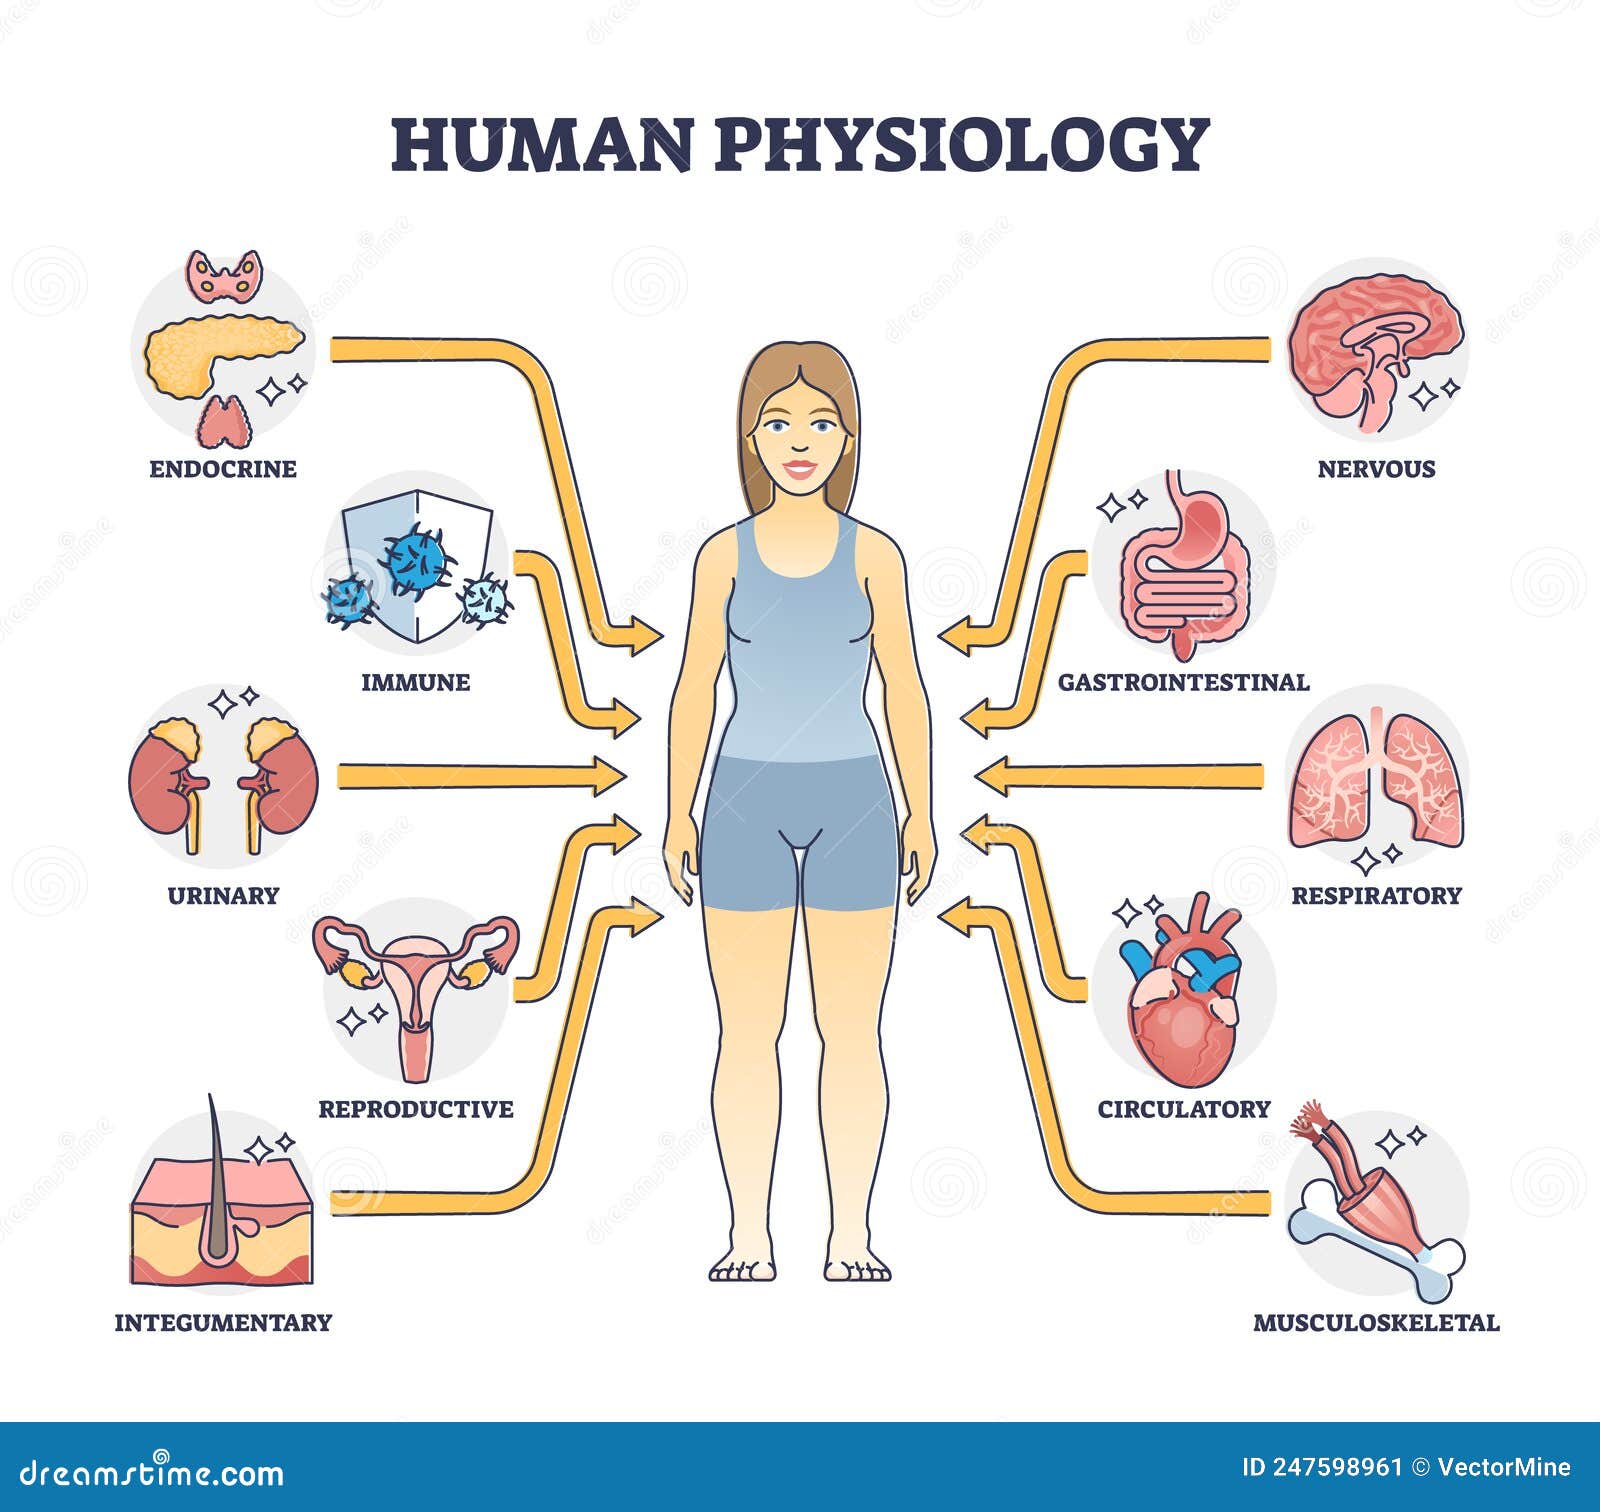 human physiology as body functions and organ health study outline diagram